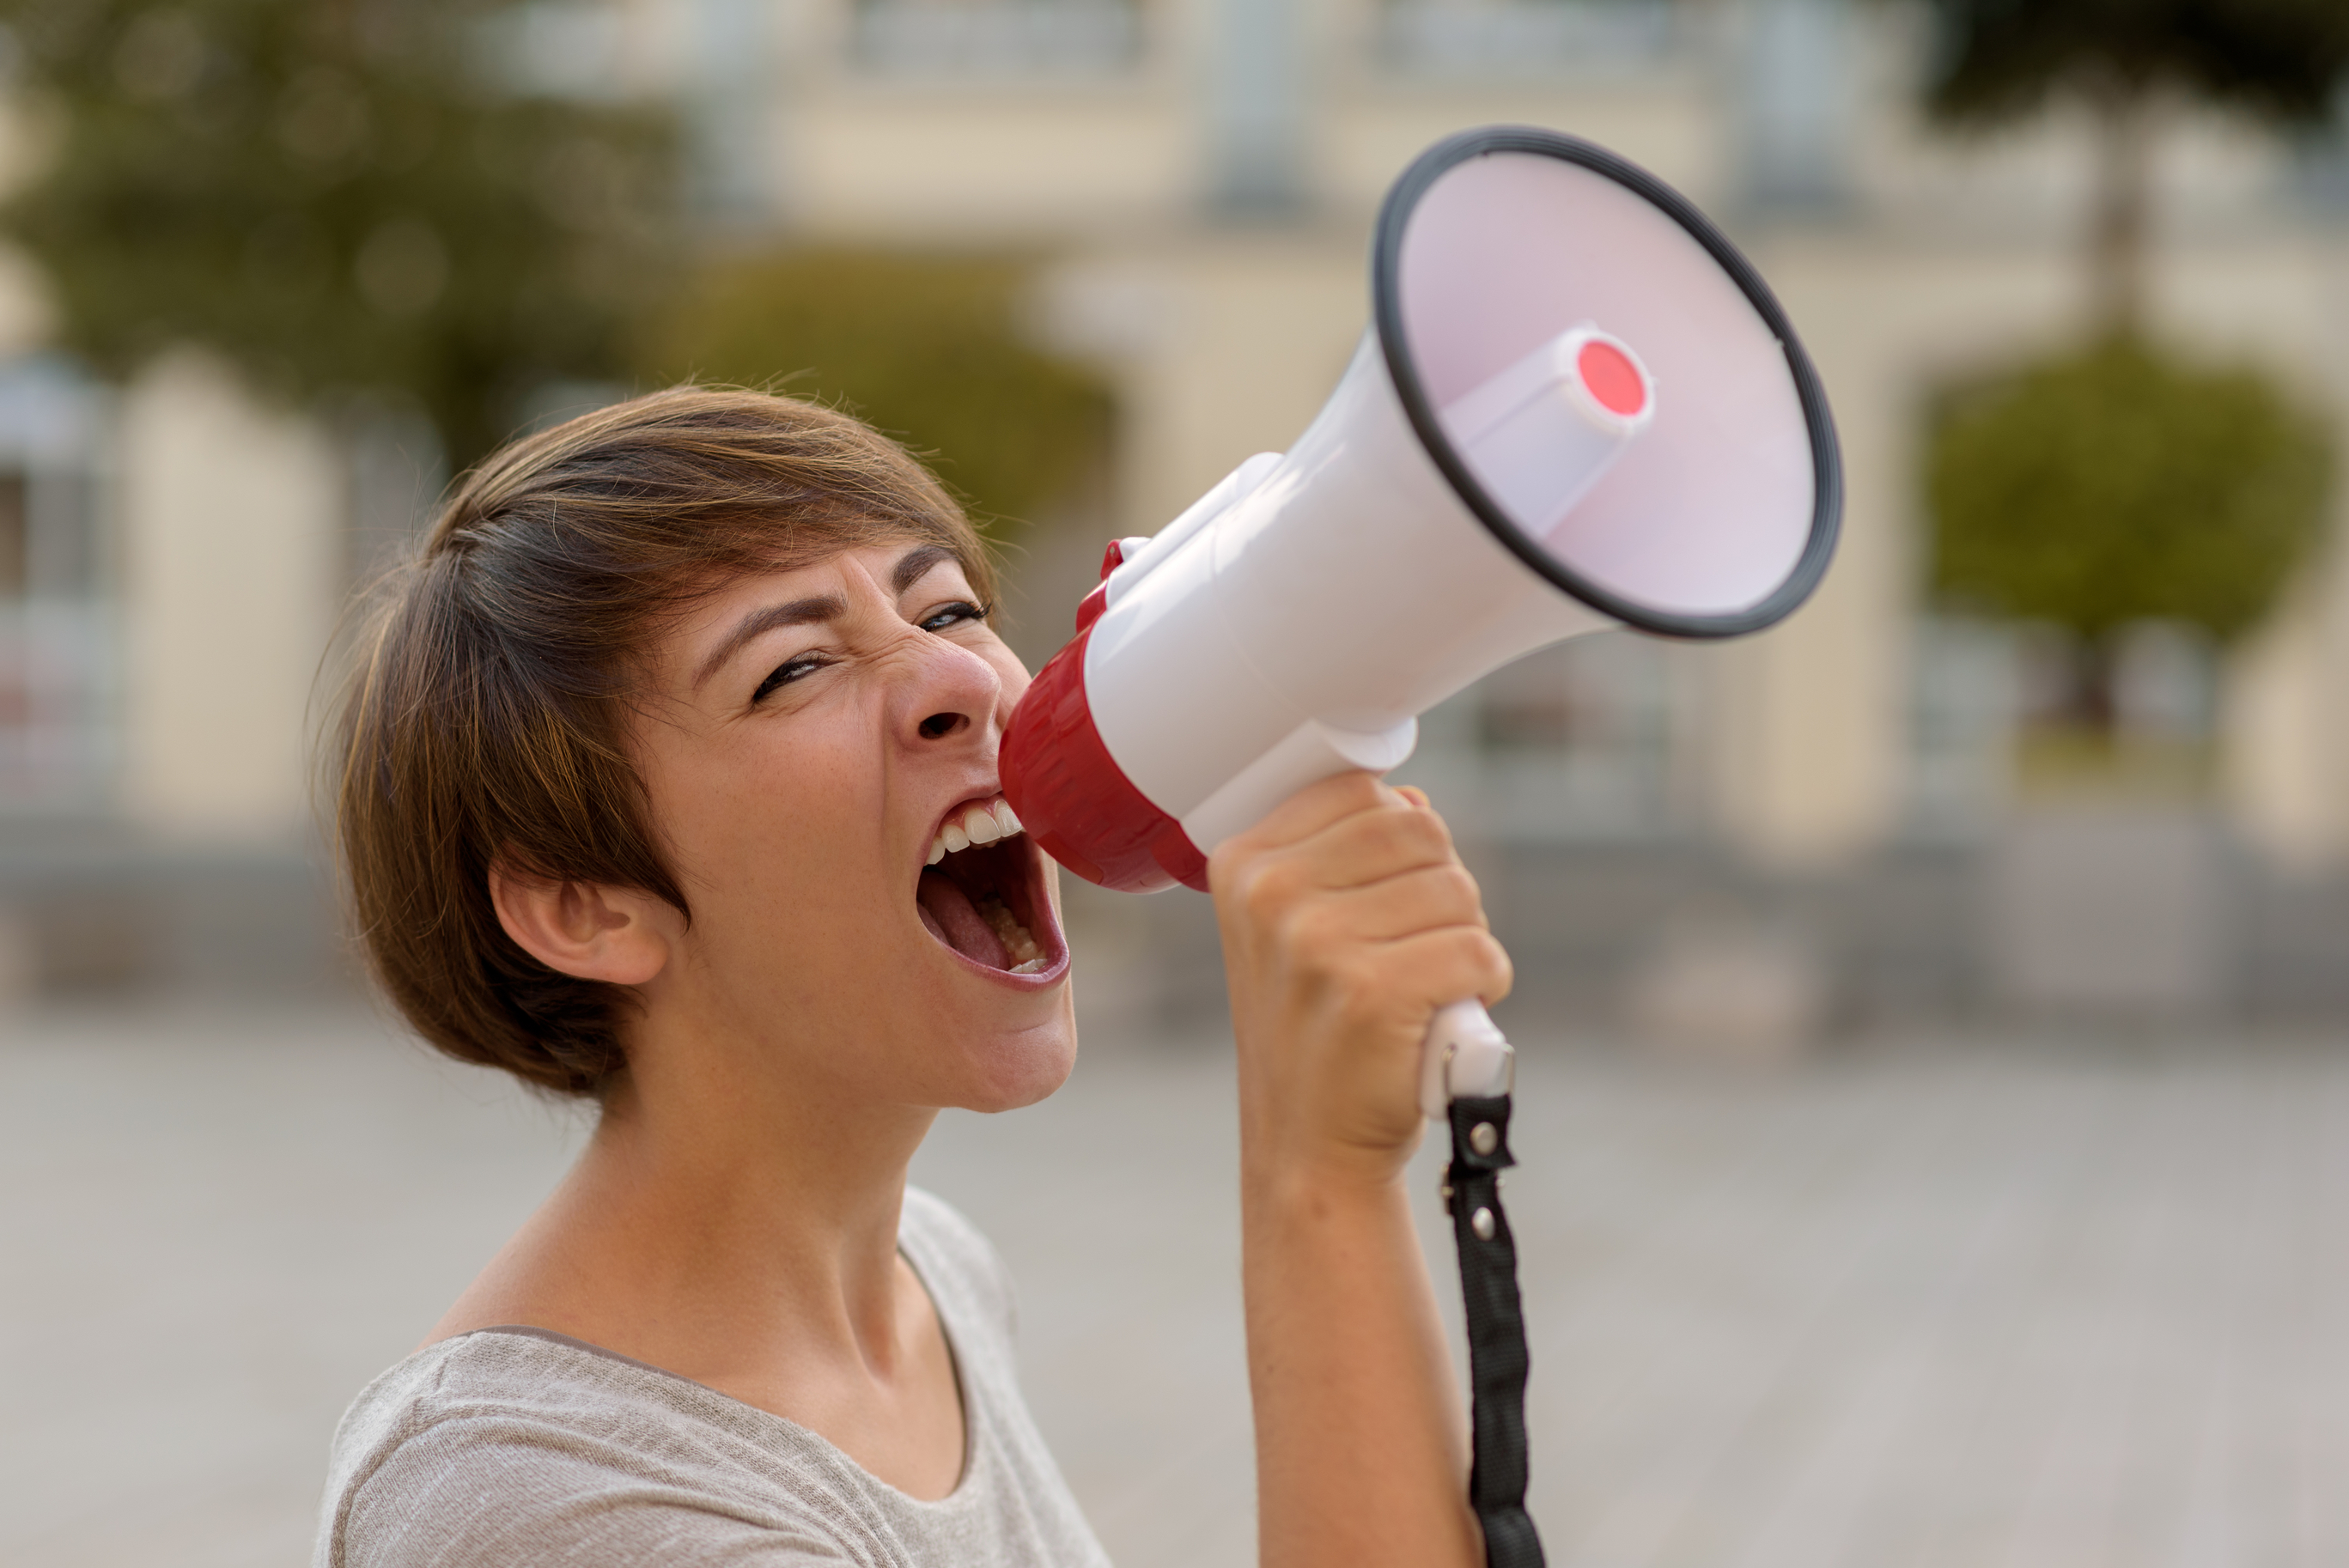 young-woman-yelling-into-a-megaphone-or-bullhorn-58947006.jpg